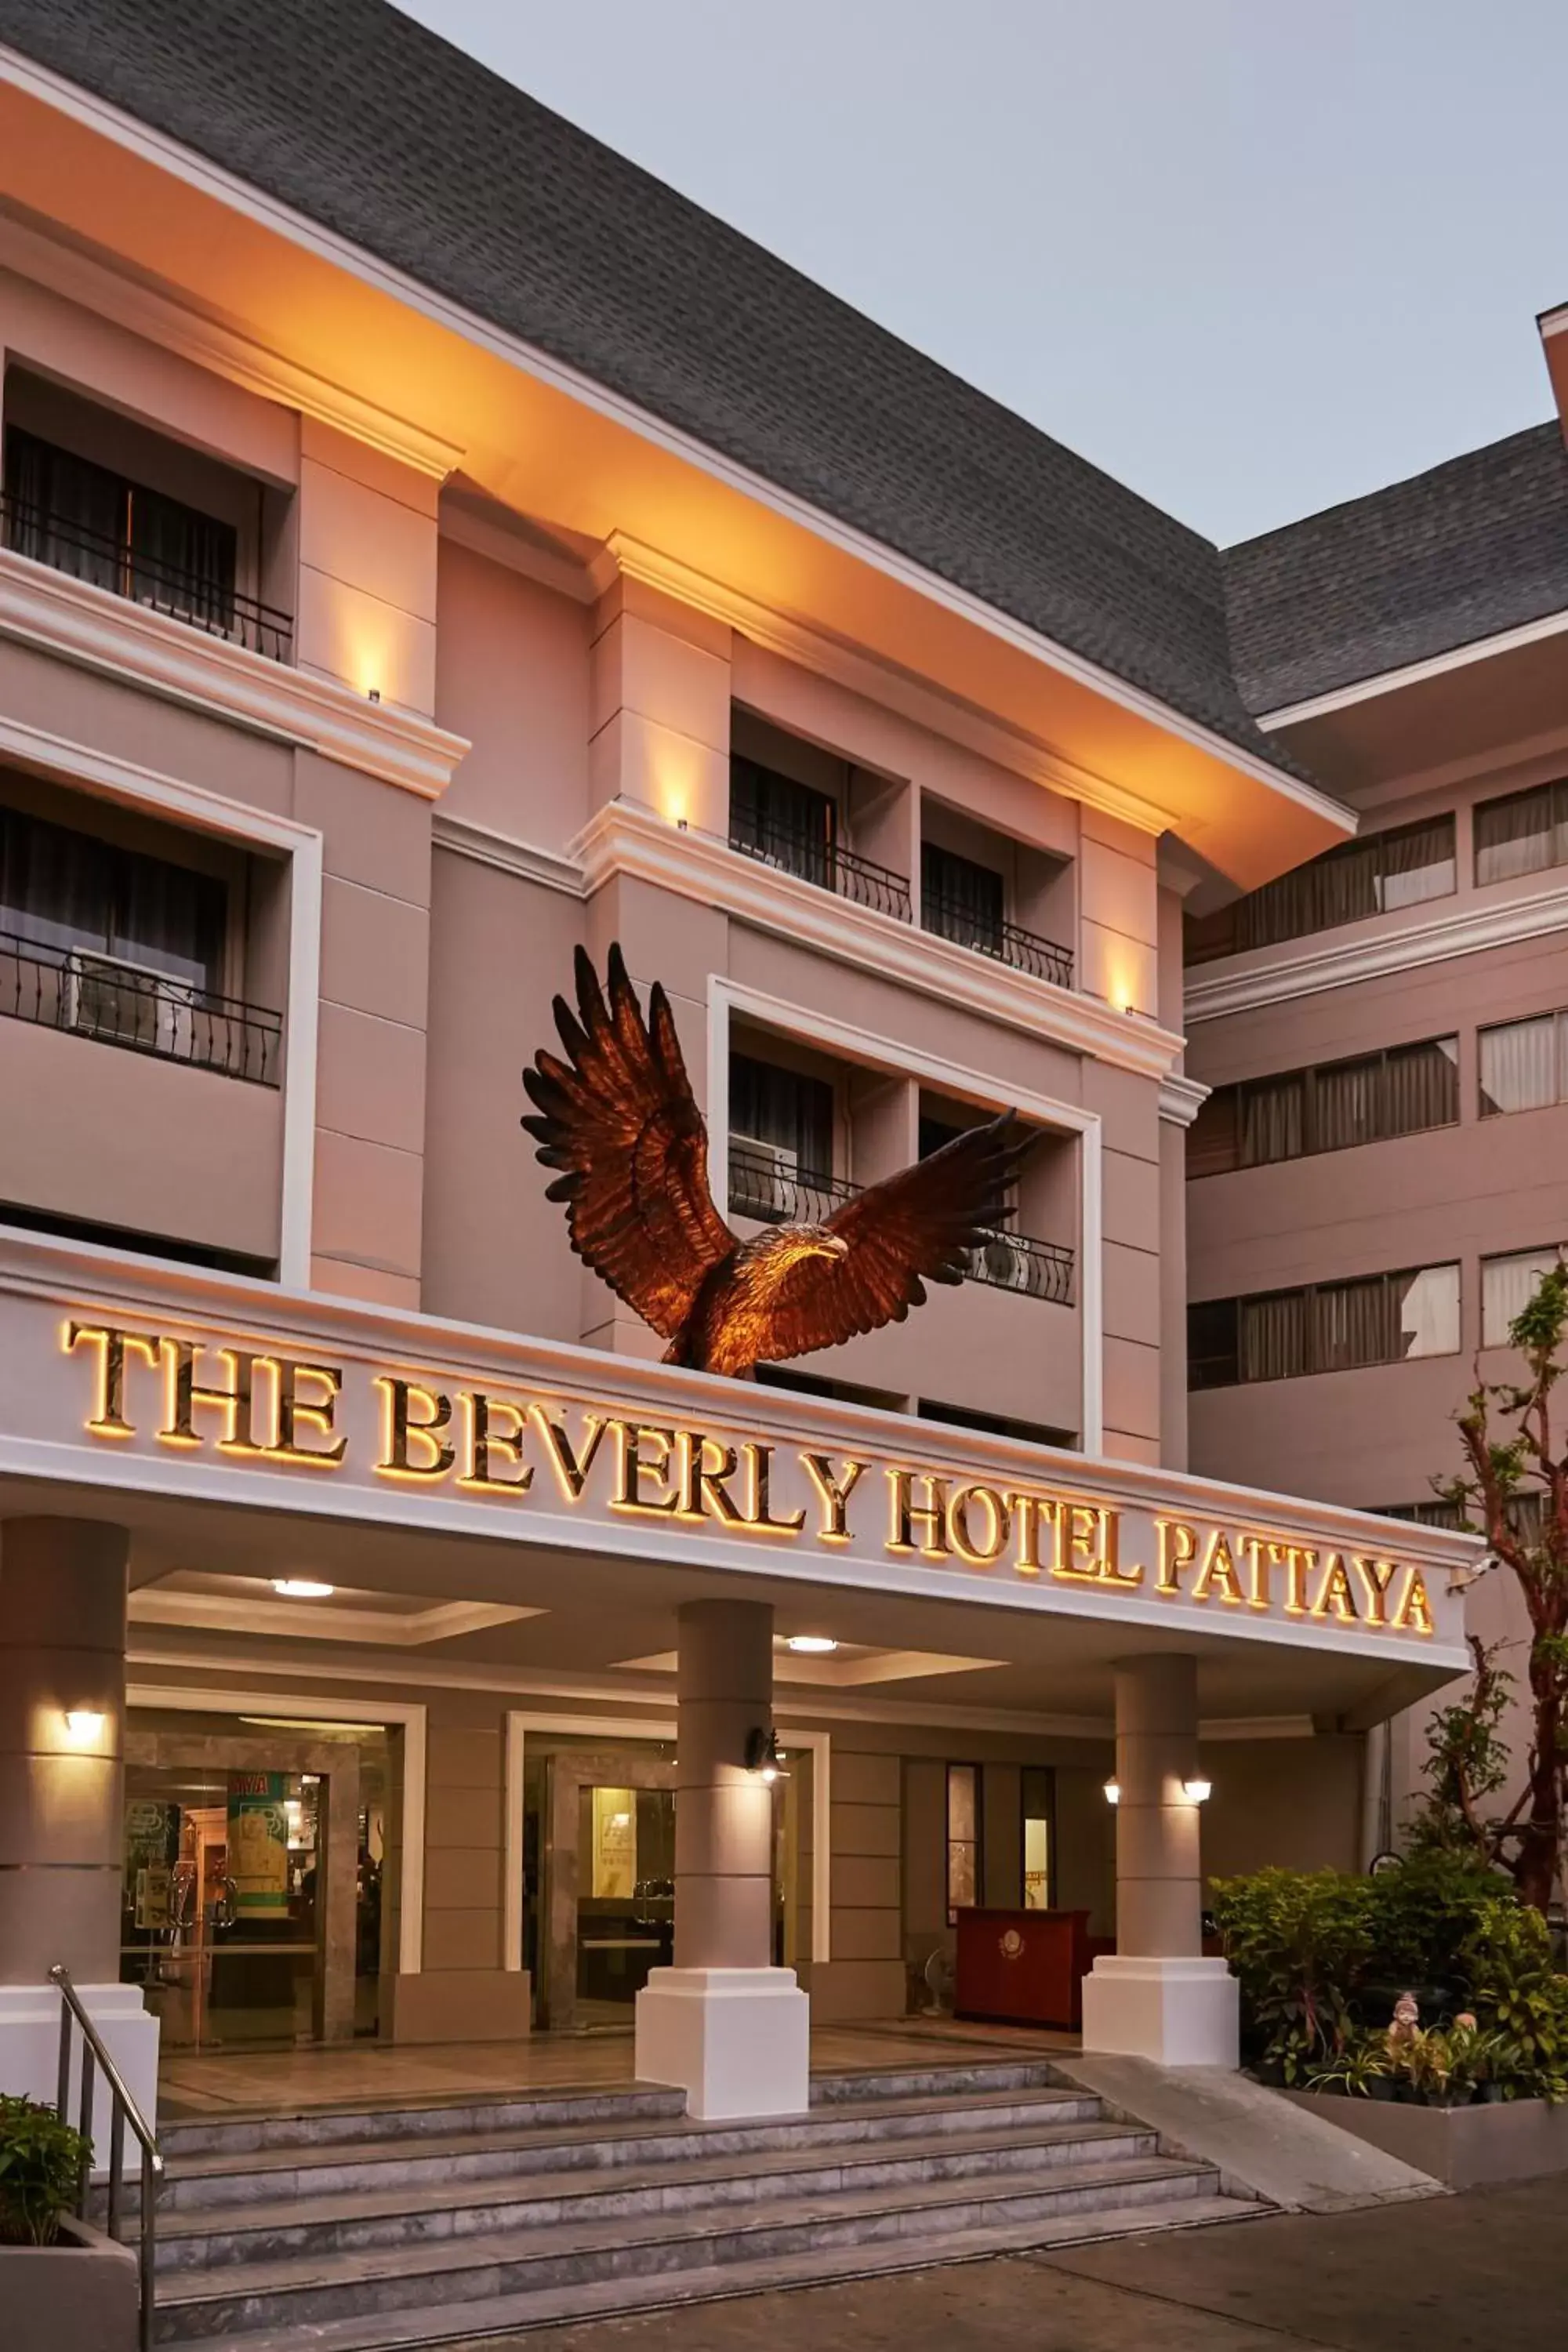 Facade/entrance, Property Building in The Beverly Hotel Pattaya